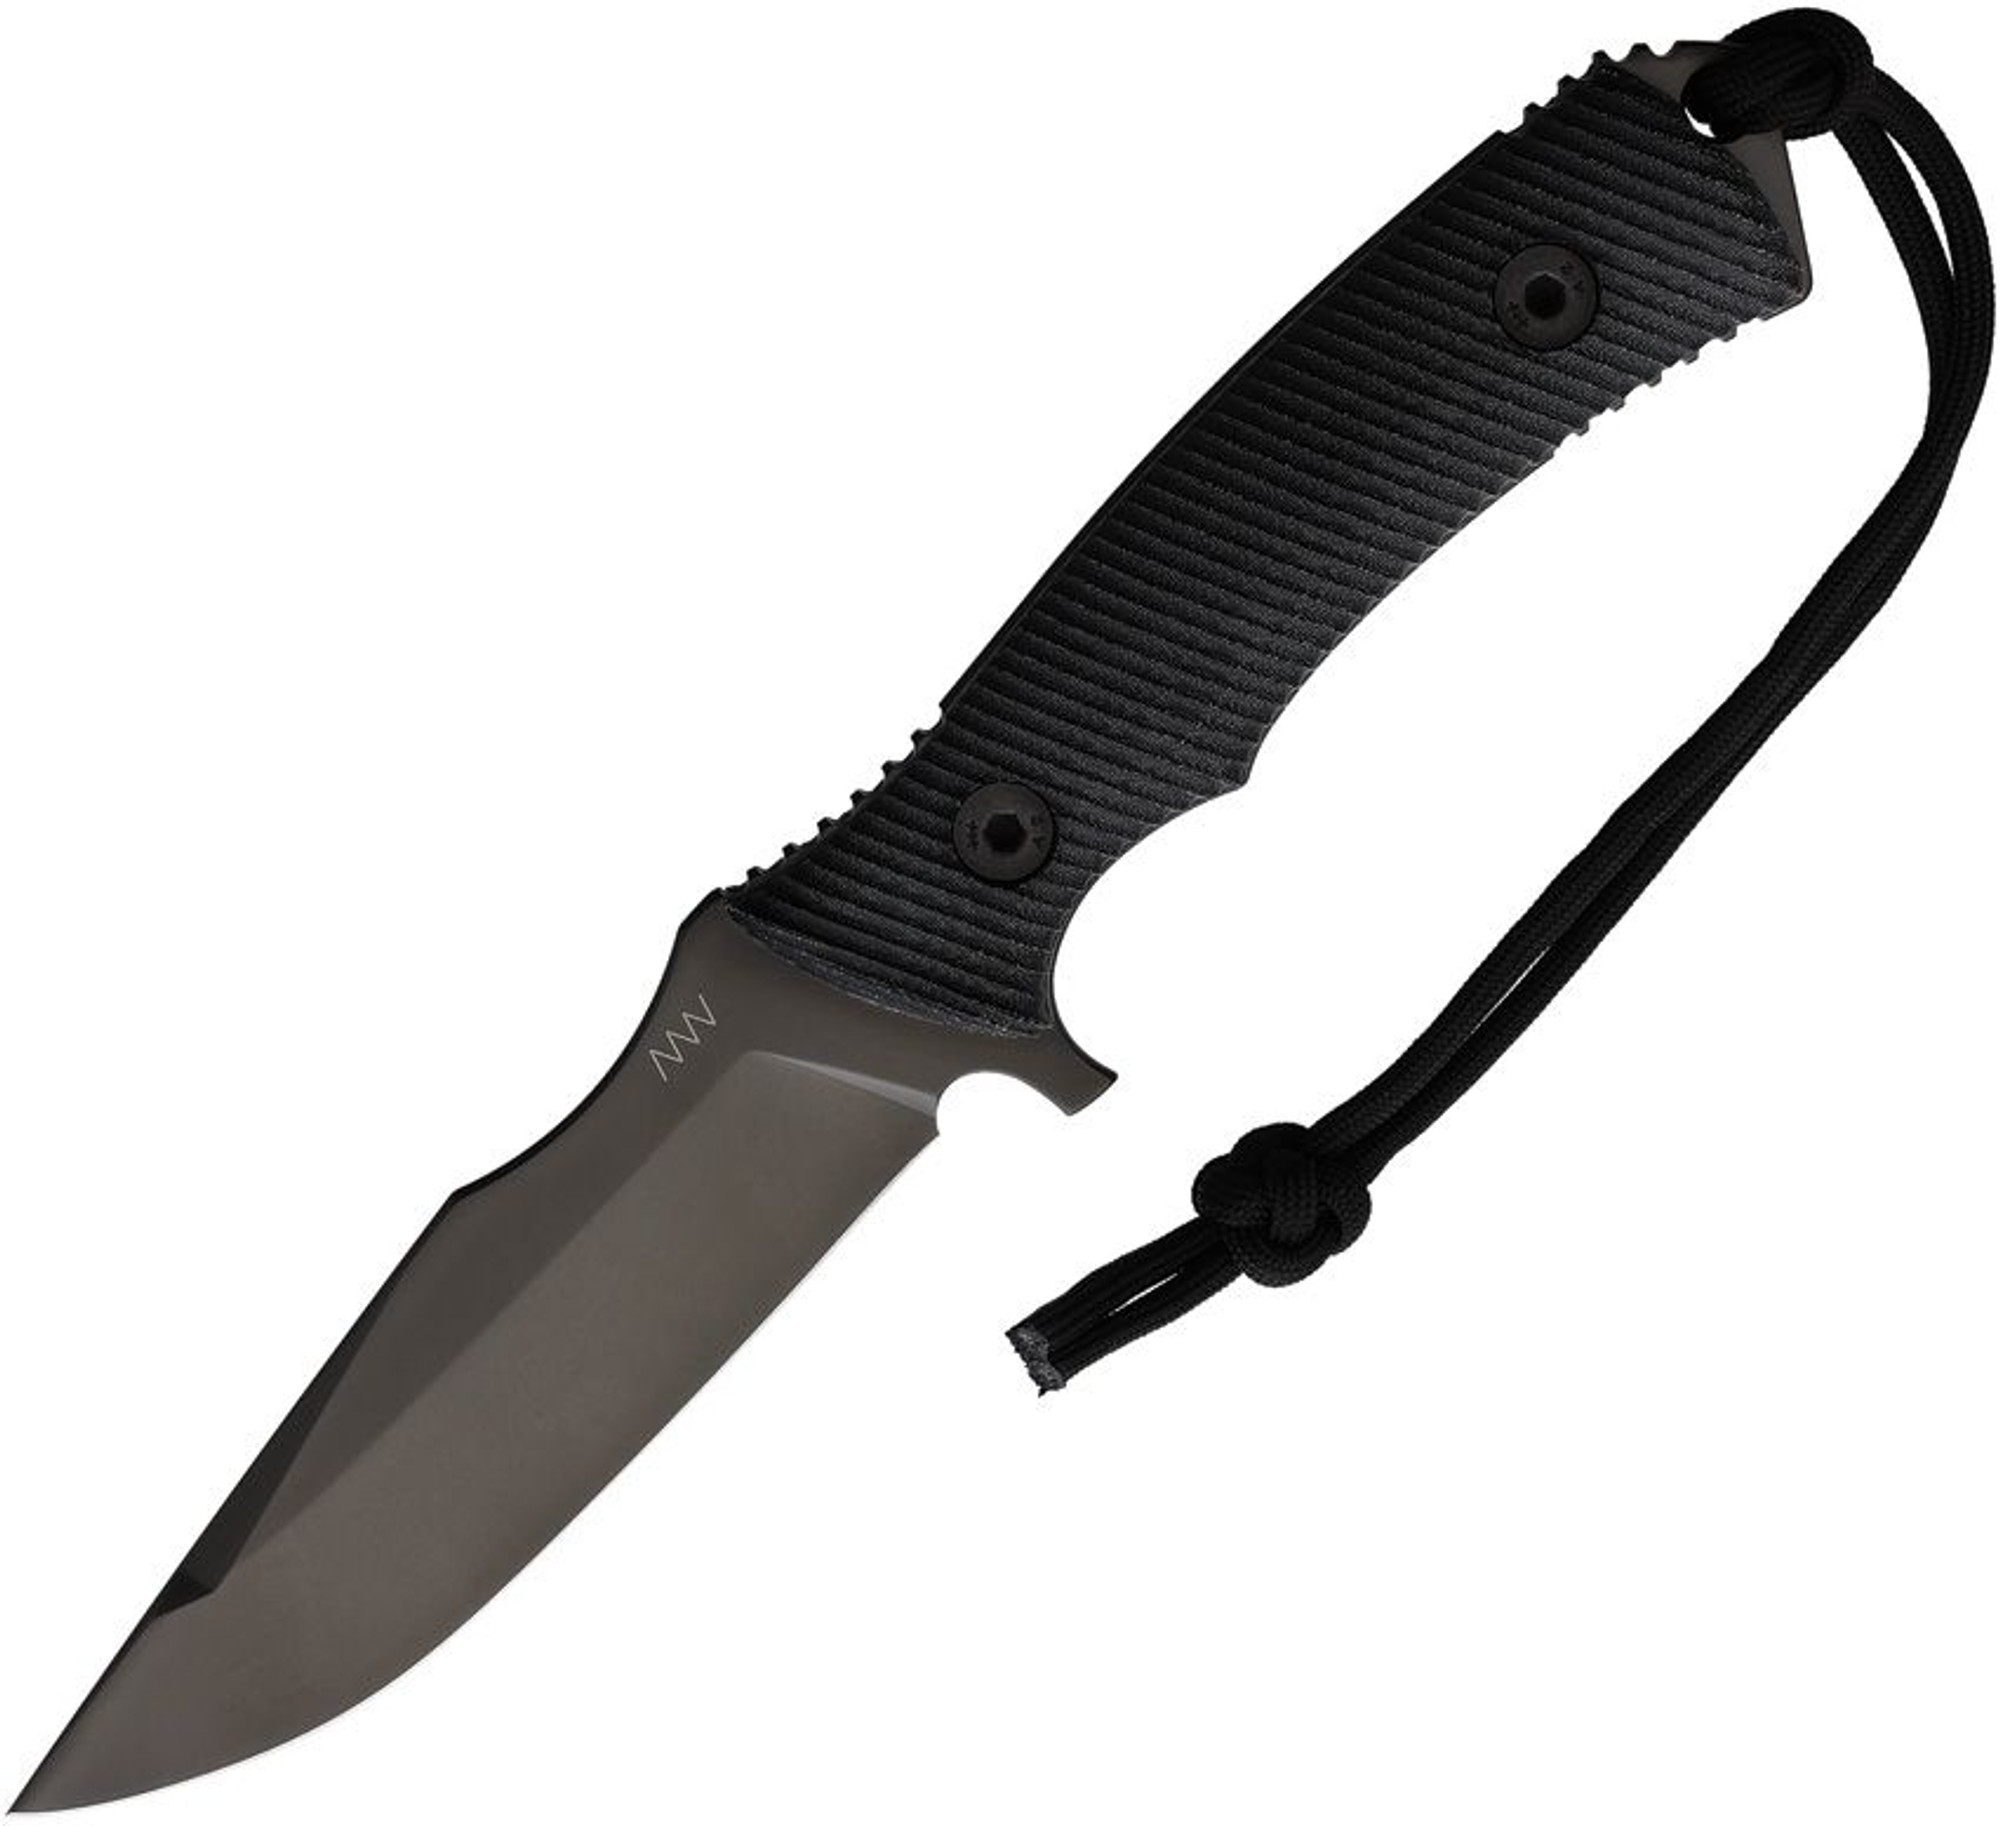 M311 Spelter Compact Knife